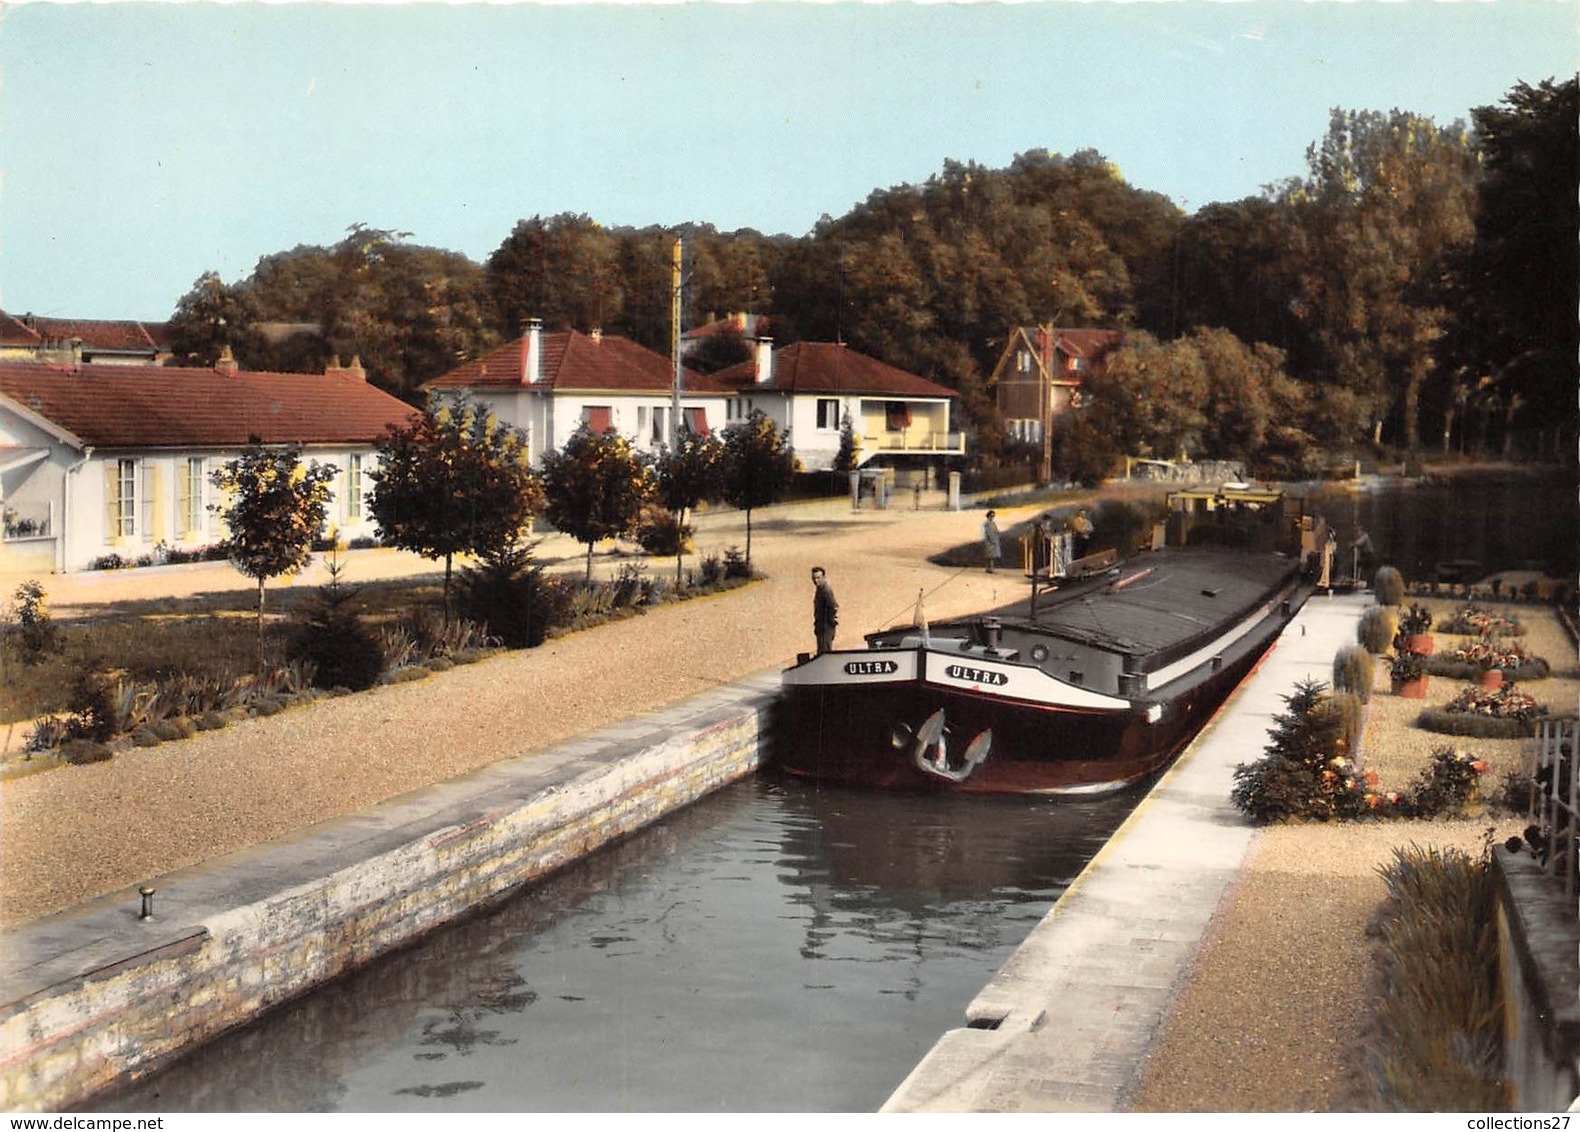 55-STENAY- LE CANAL ET L'ECLUSE - Stenay